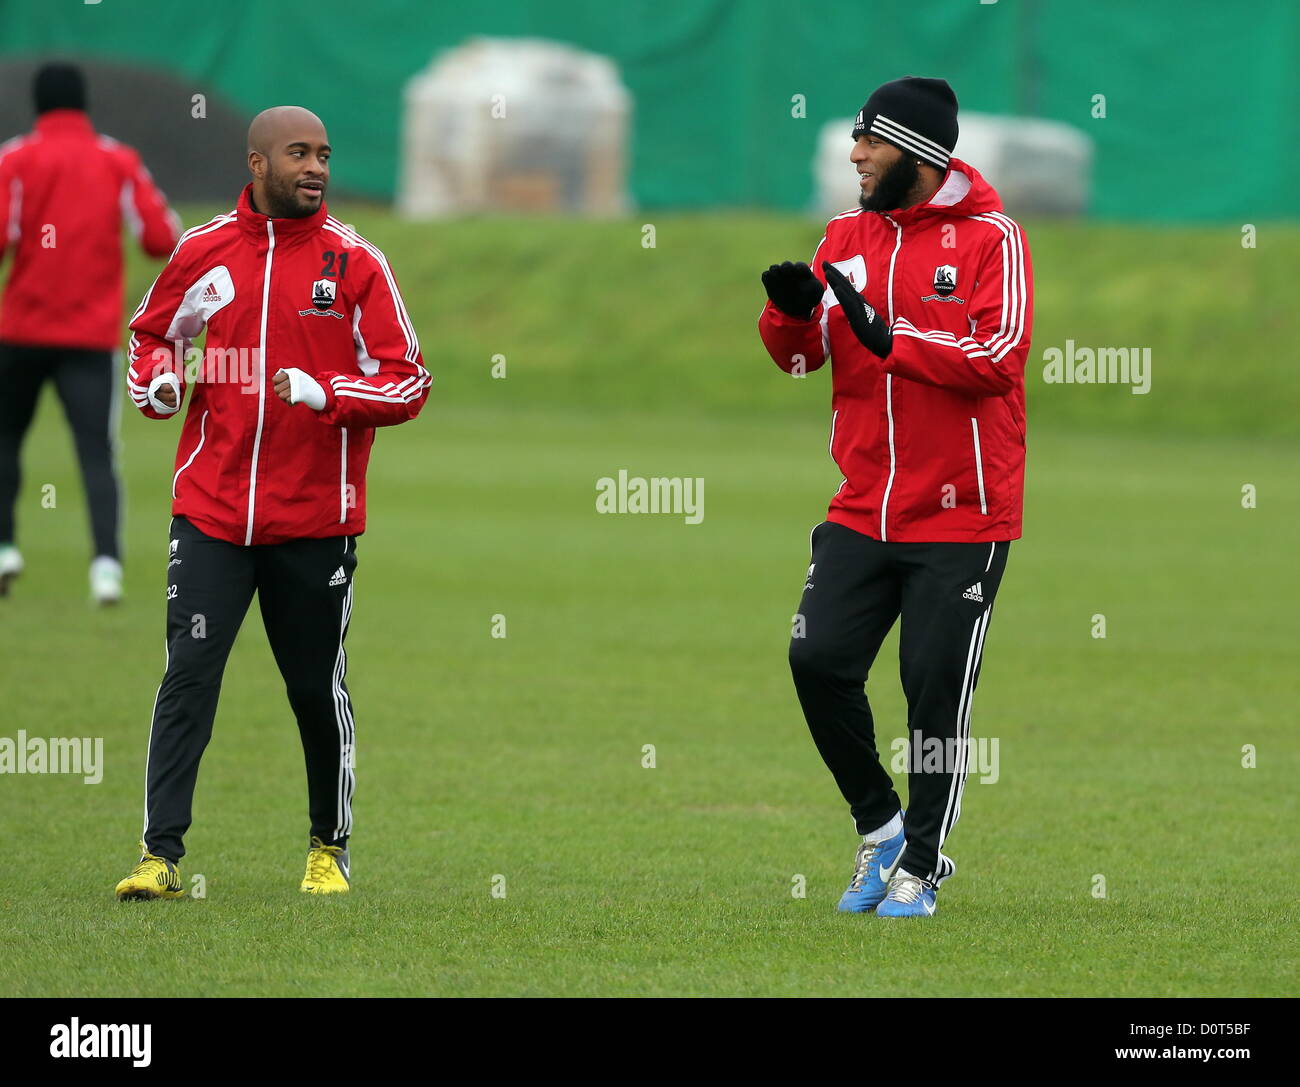 Wales, UK. Friday, 30 November 2012  Pictured L-R: Dwight Tiendali and Kemy Agustien   Re: Swansea City FC, training at the Llandarcy training ground in south Wales. Stock Photo